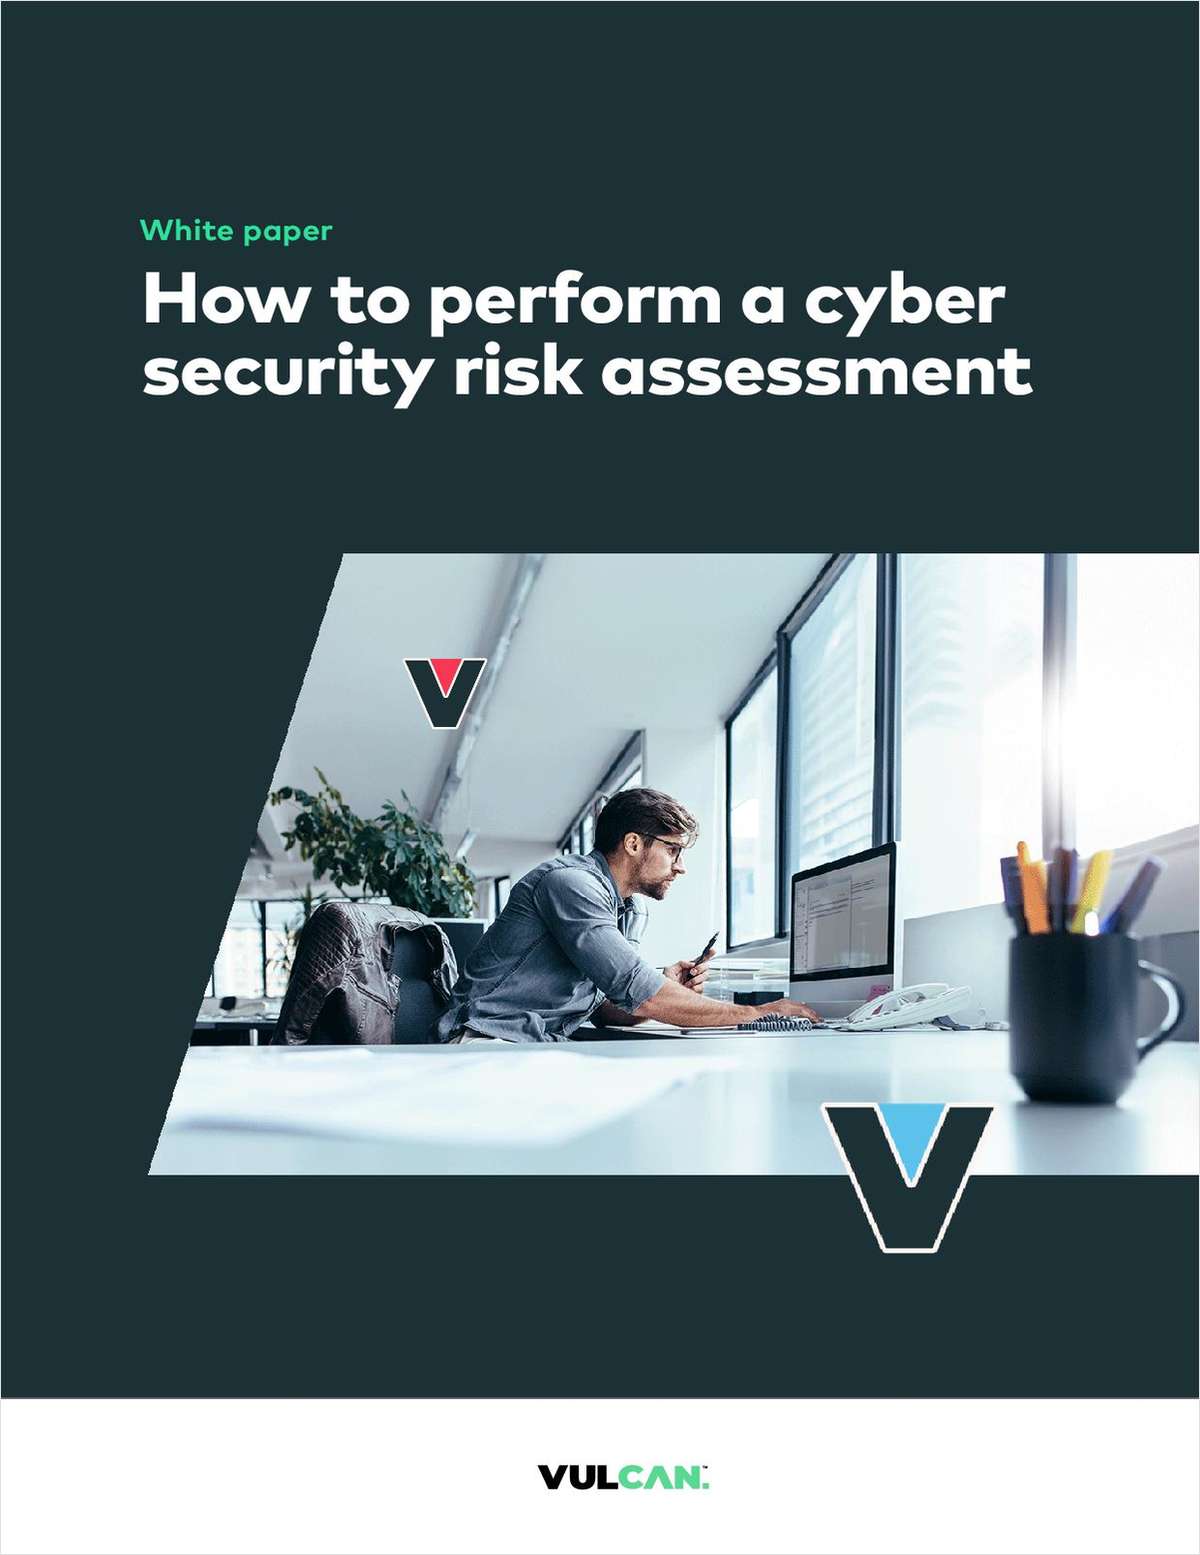 How to perform a cyber security risk assessment